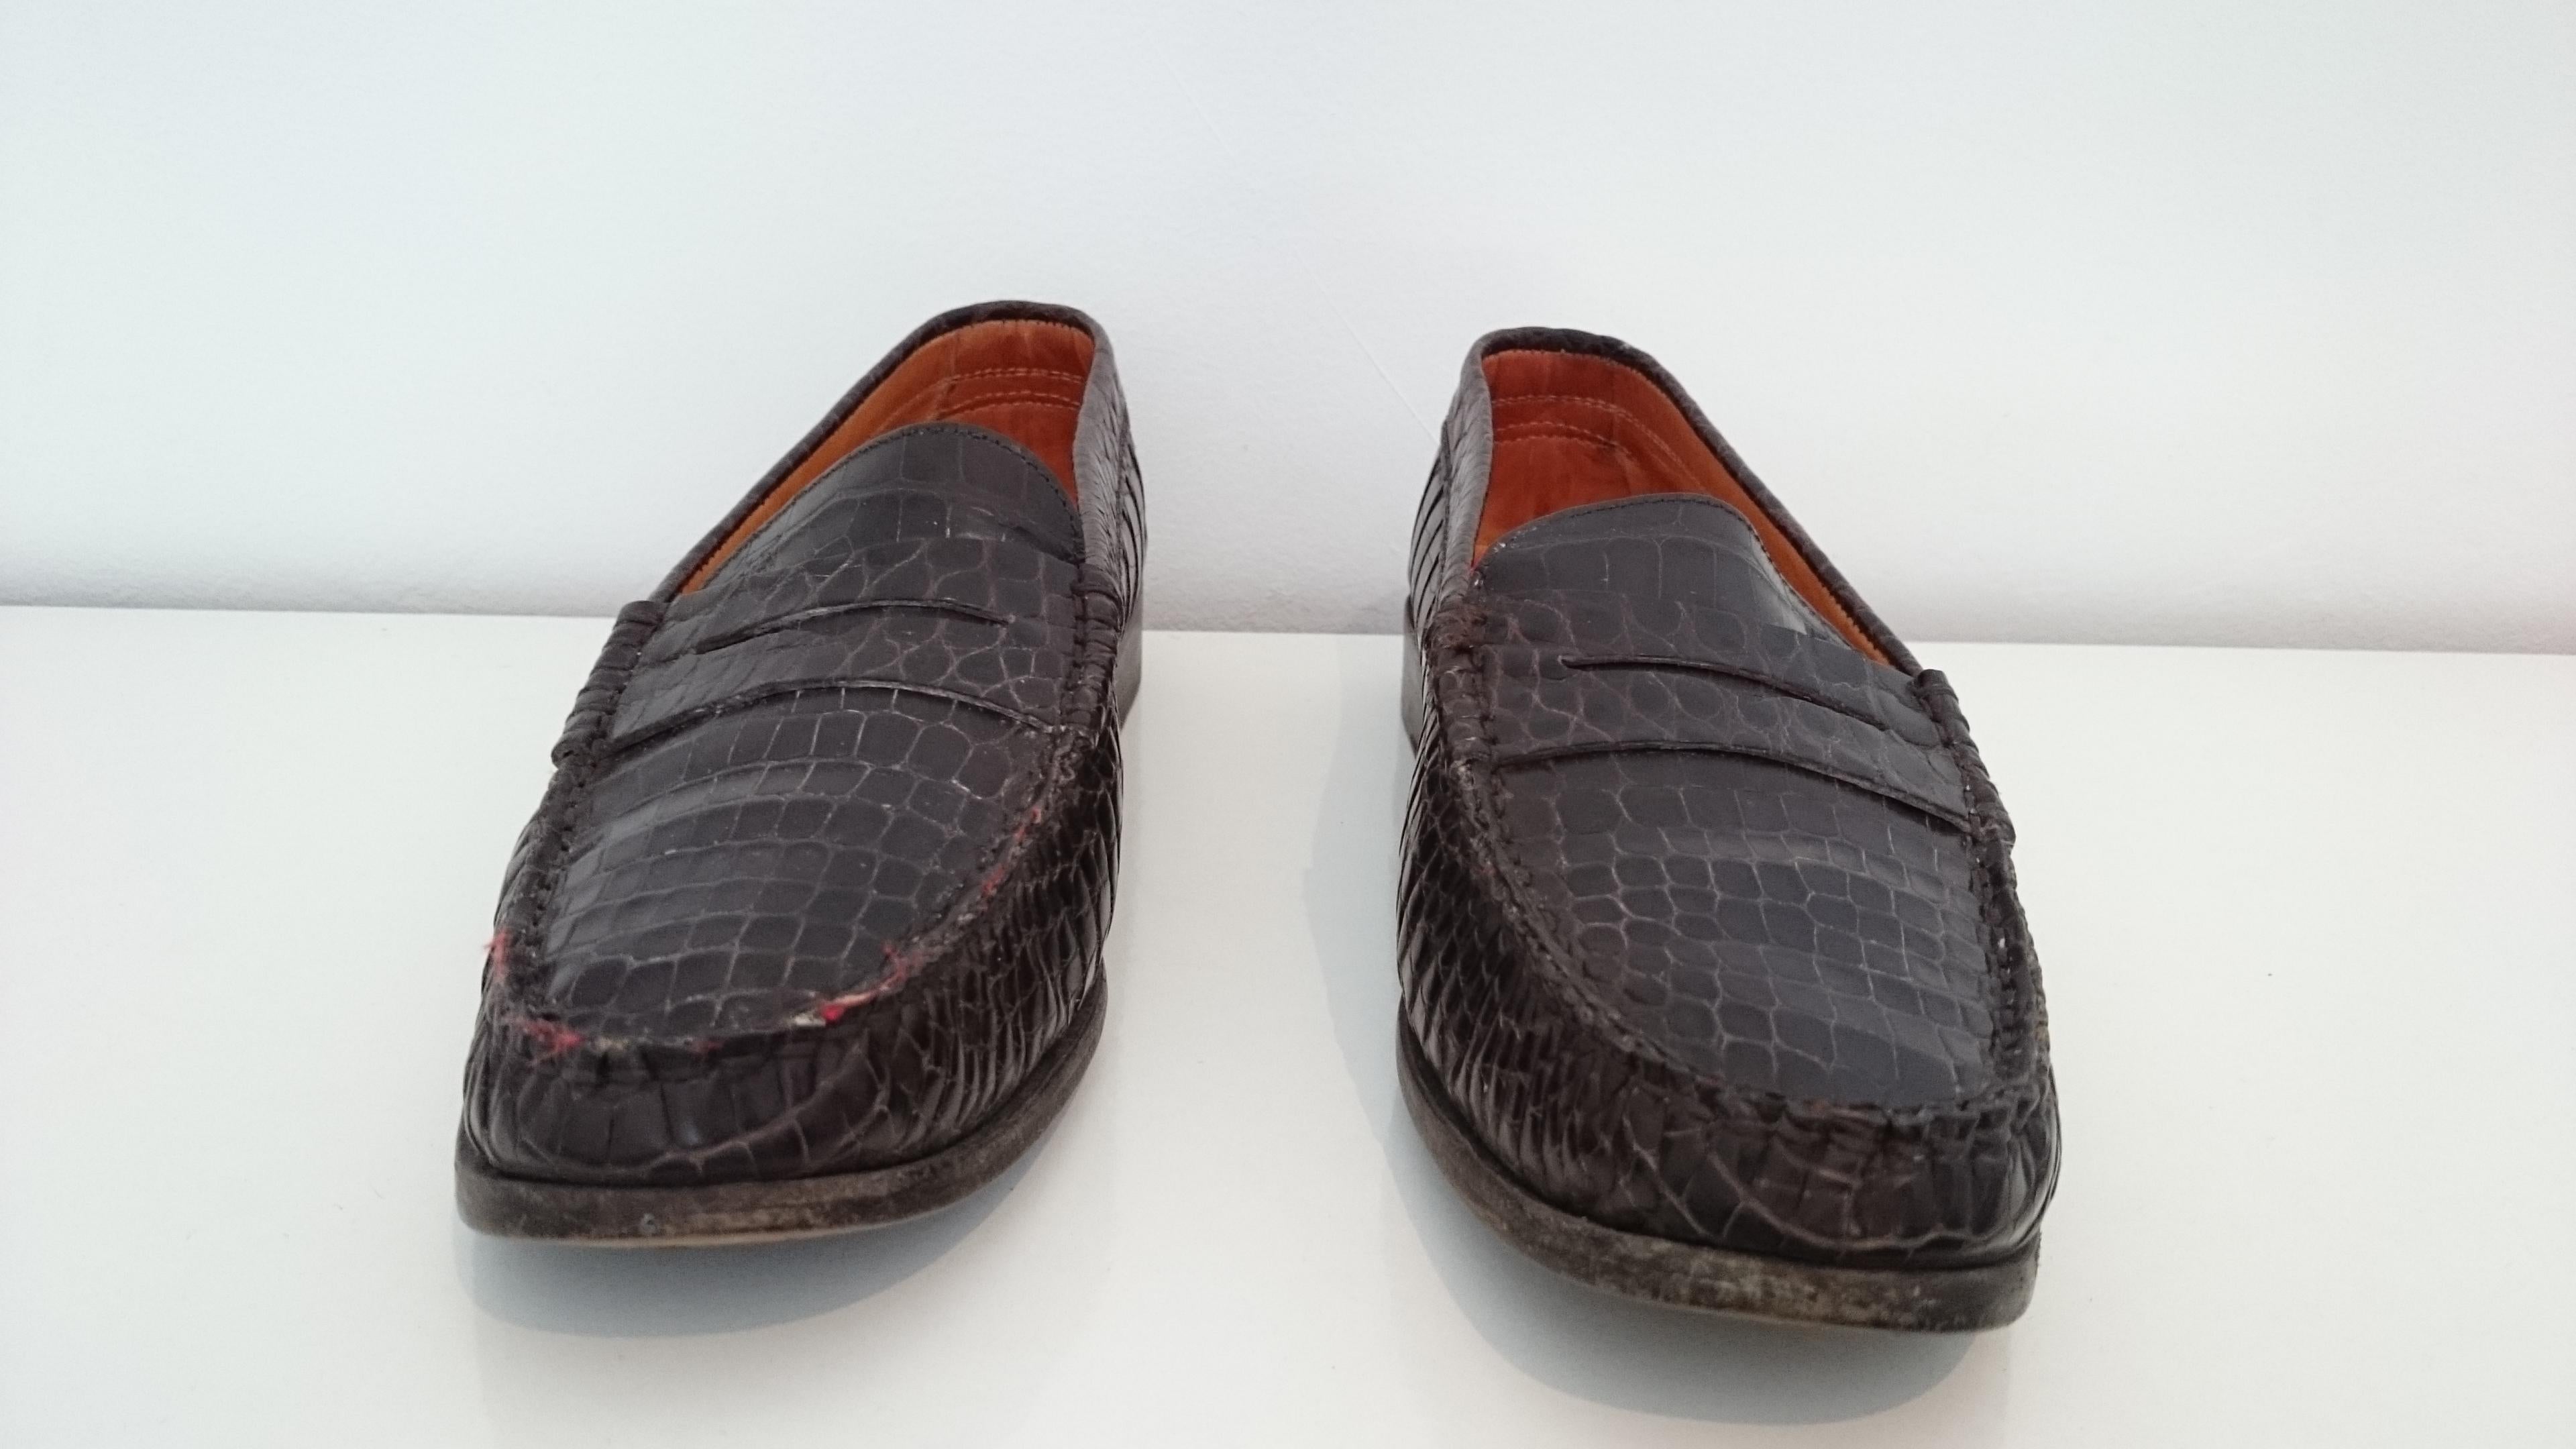 Tod's Mocassins in Wild Crocodile Leather.
Color: Dark Brown 
Conditions: Very good.
Size: 40
Made in Italy